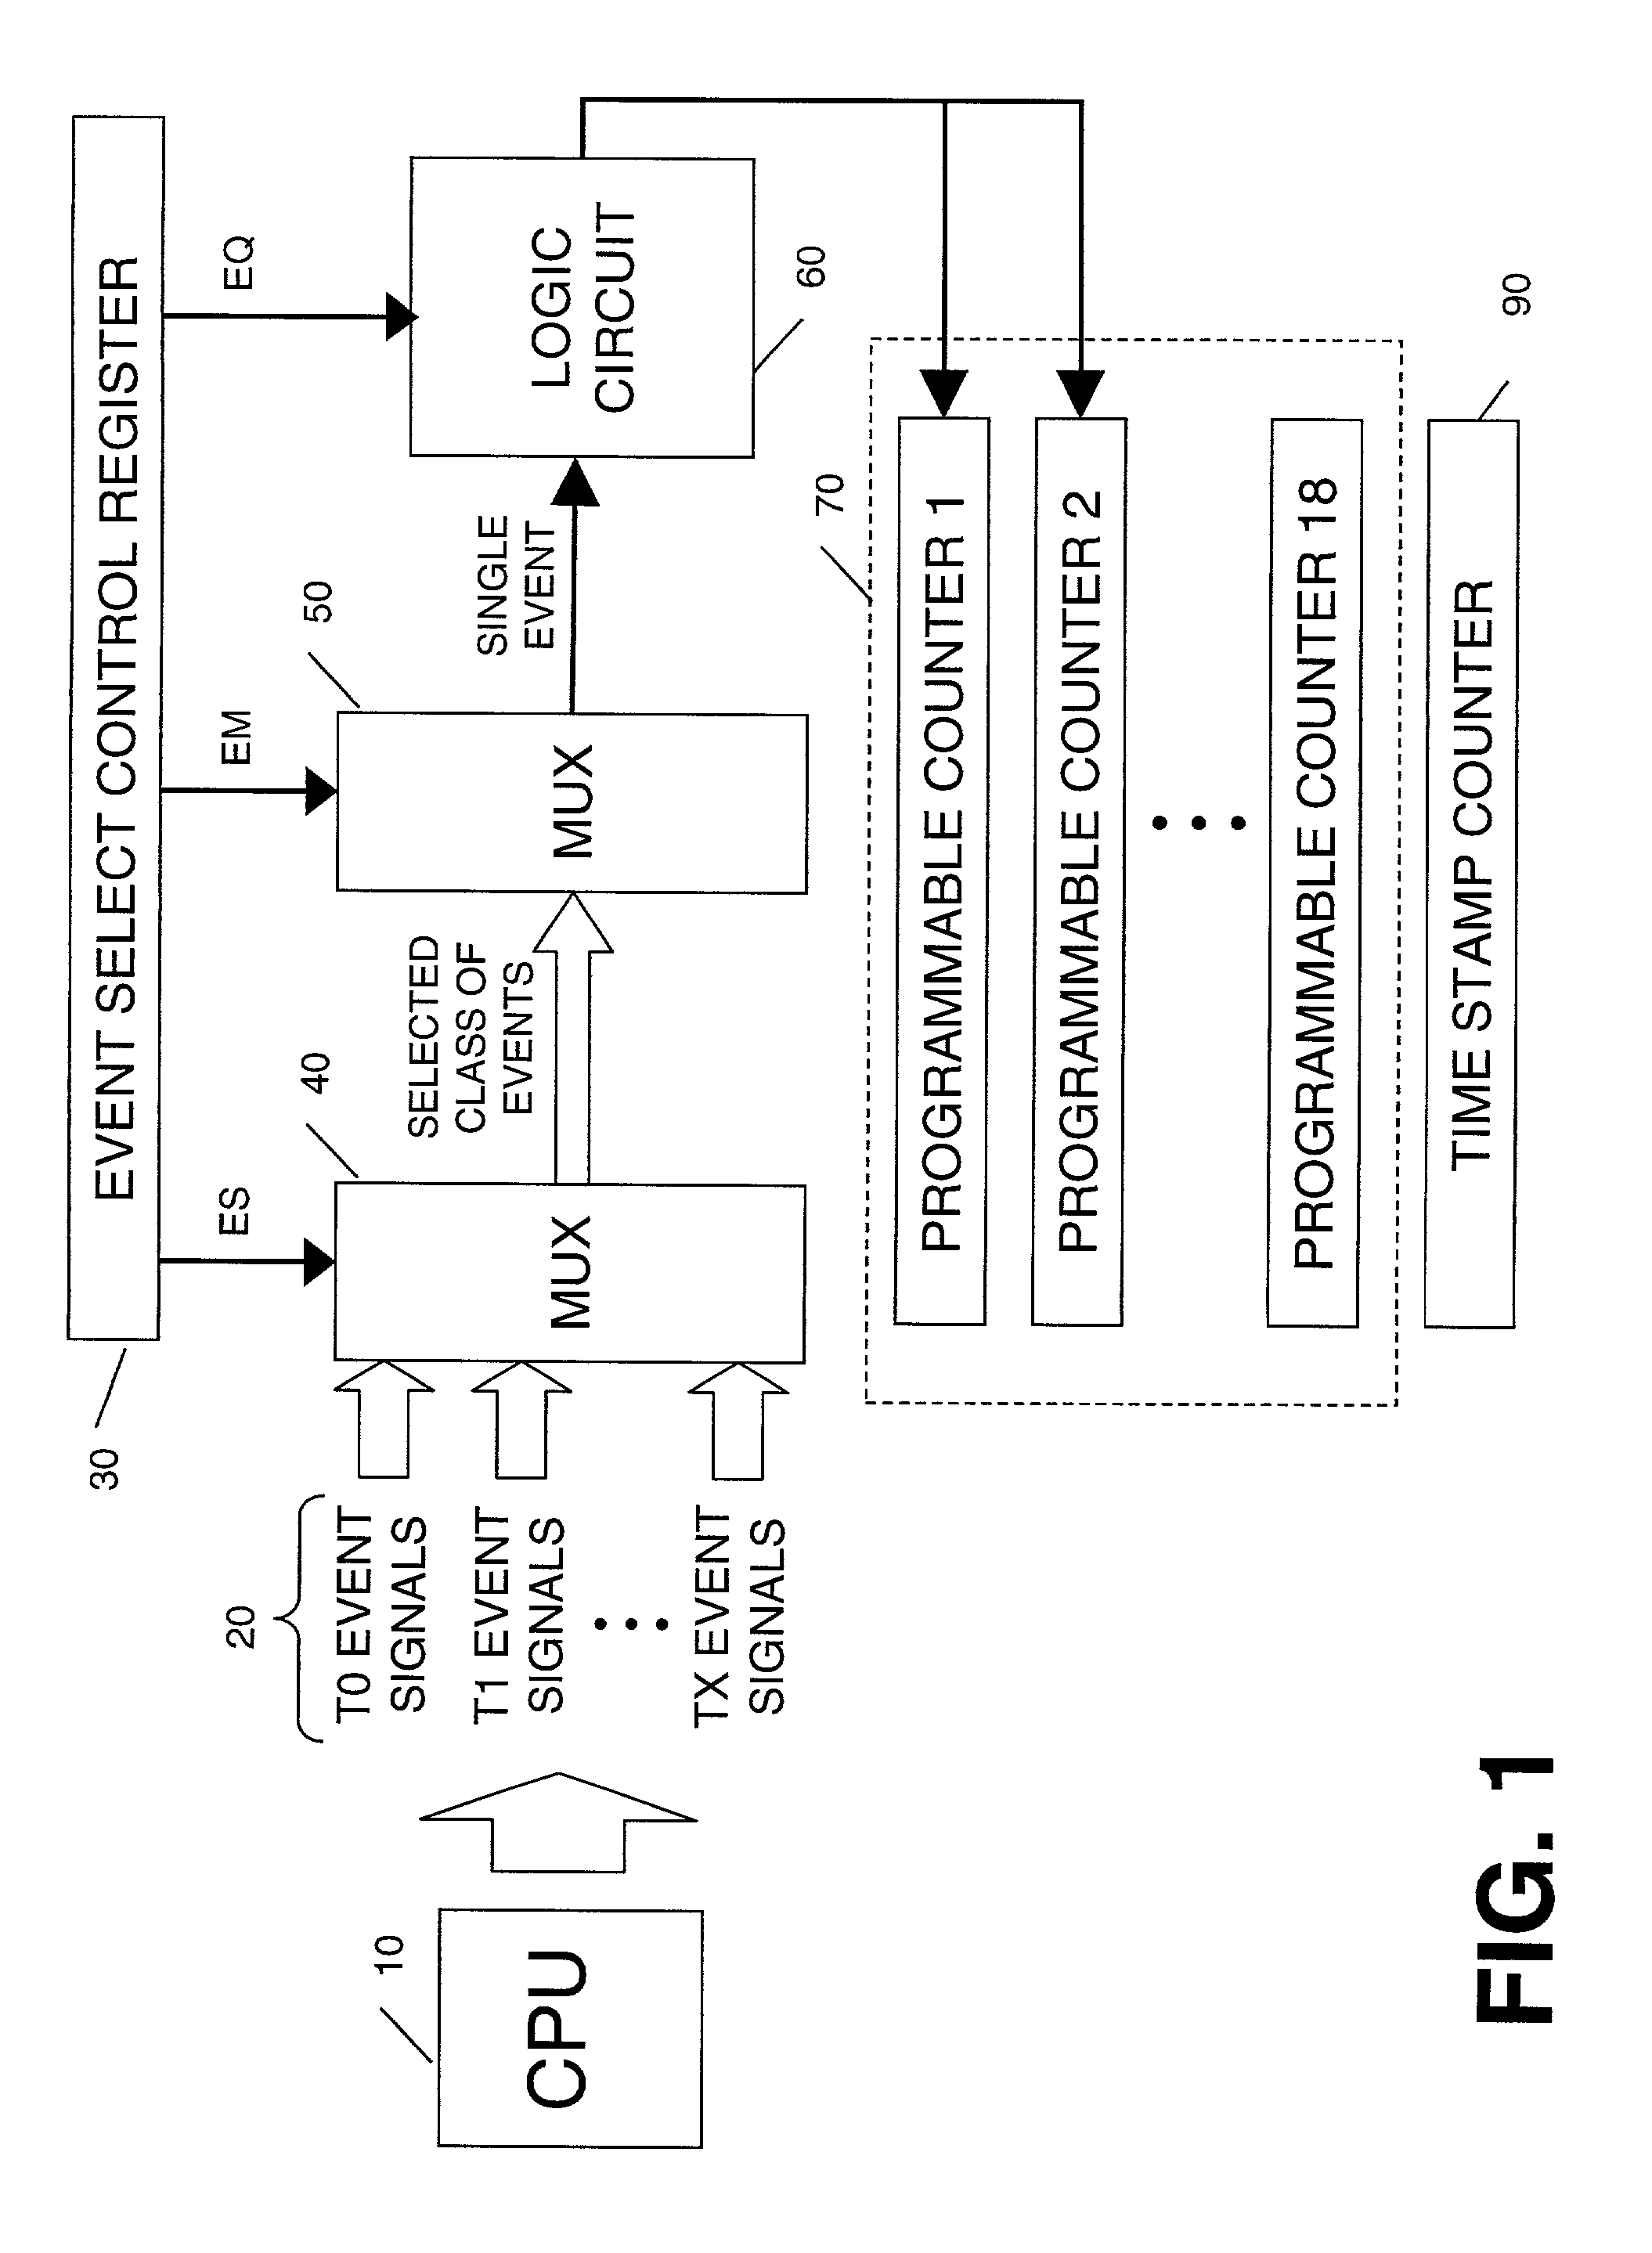 Qualification of event detection by thread ID and thread privilege level